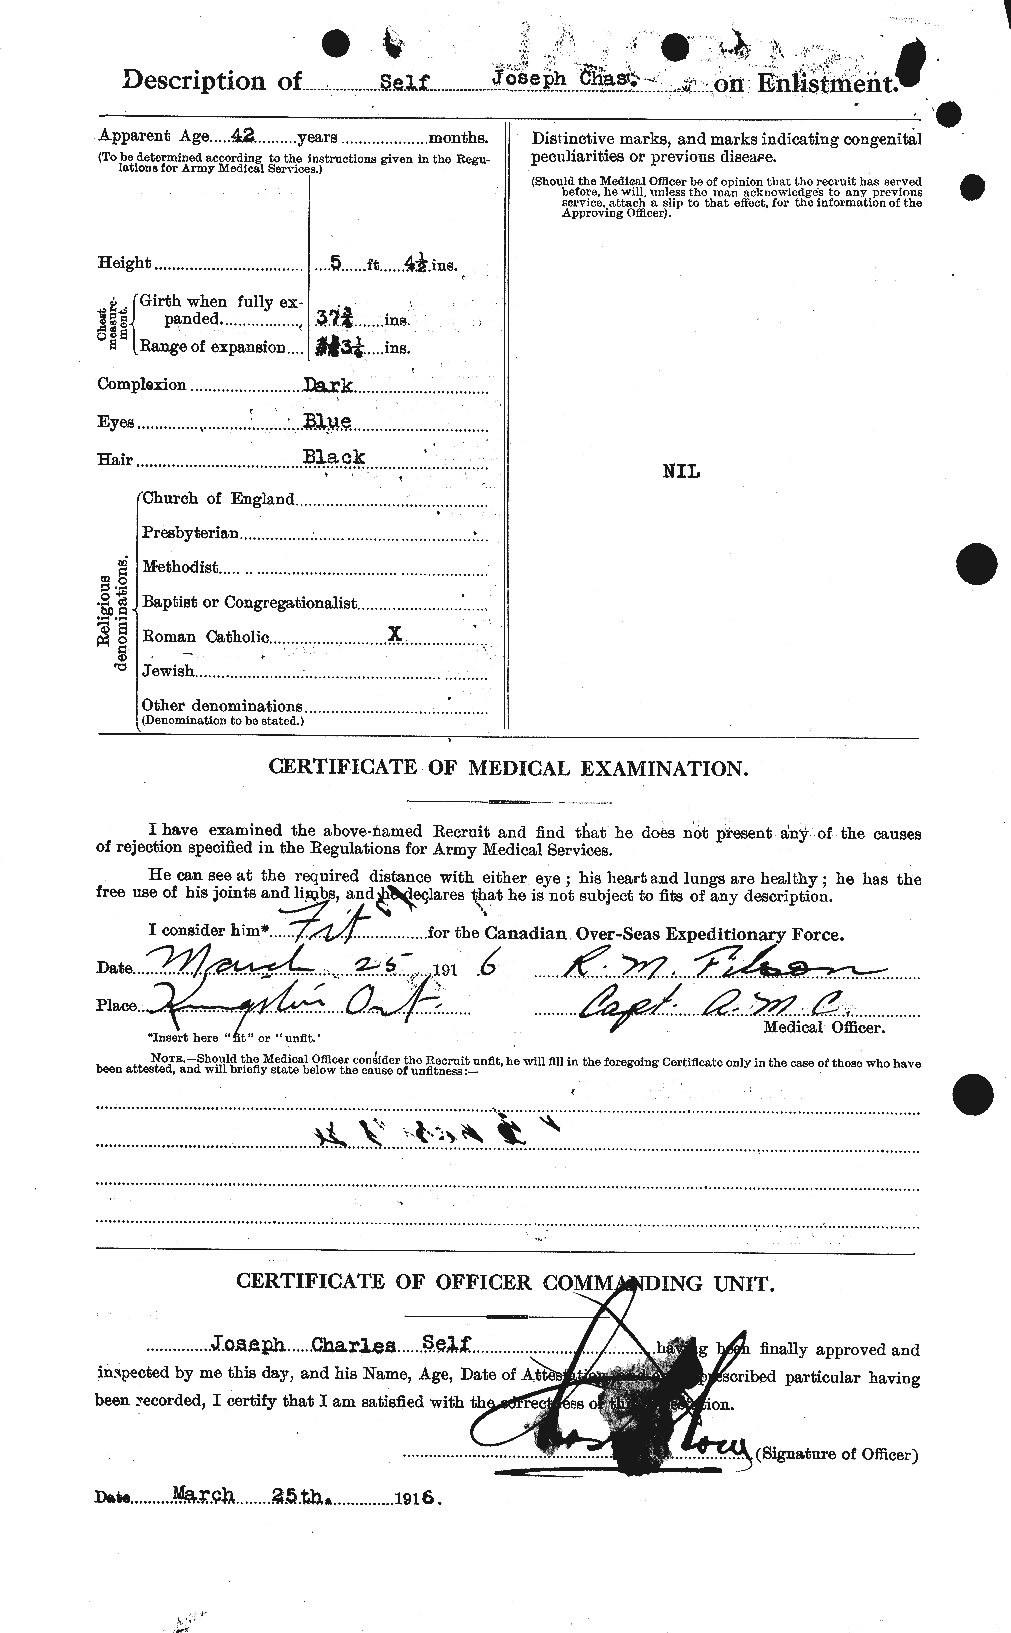 Personnel Records of the First World War - CEF 088381b